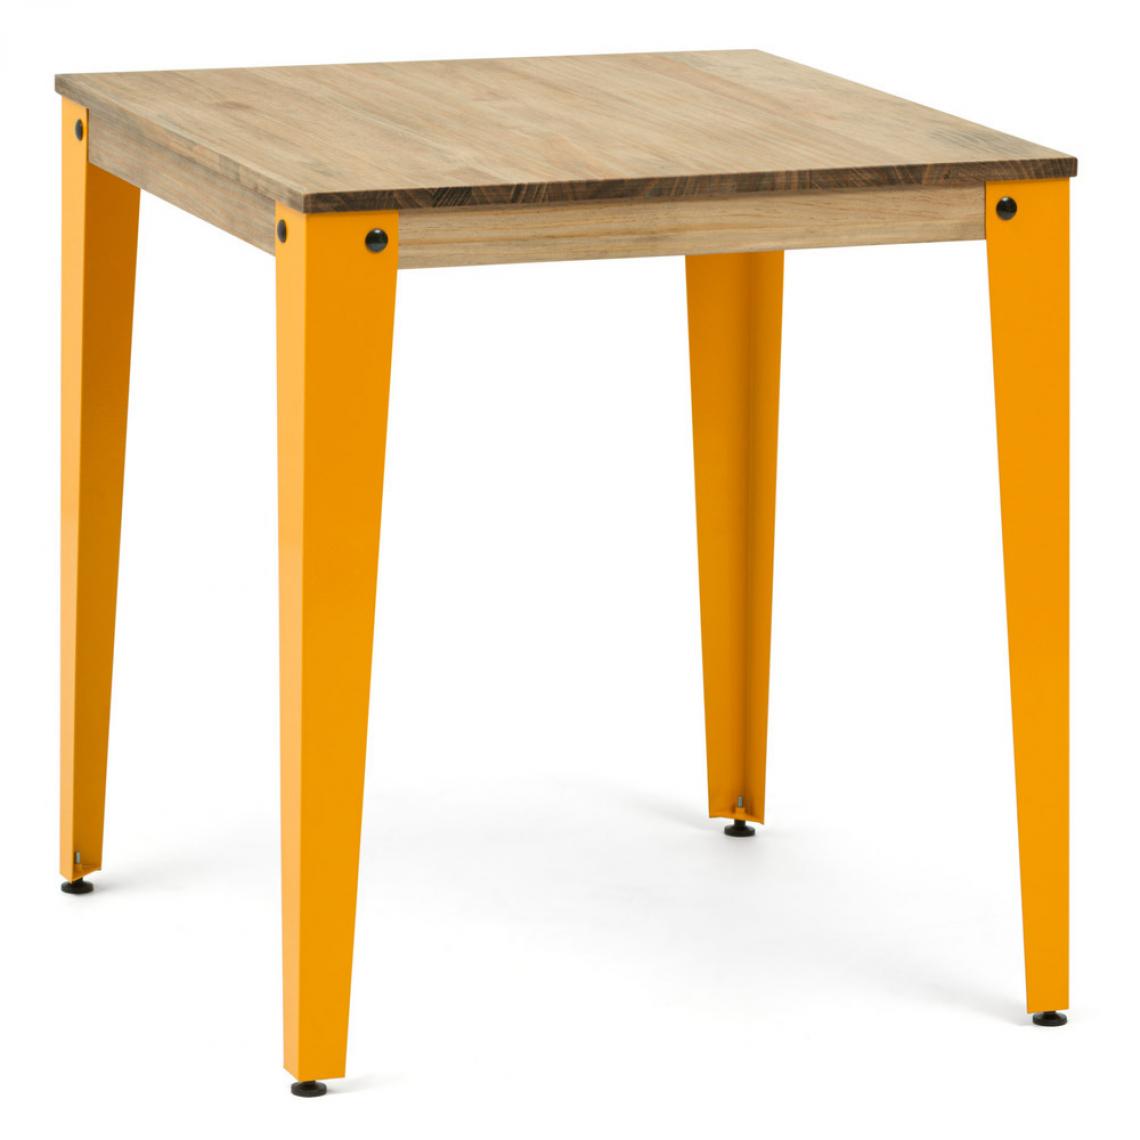 BOX FURNITURE - Table Salle à Manger Lunds 59x59x75cm Jaune-Vieilli. Box Furniture - Tables à manger